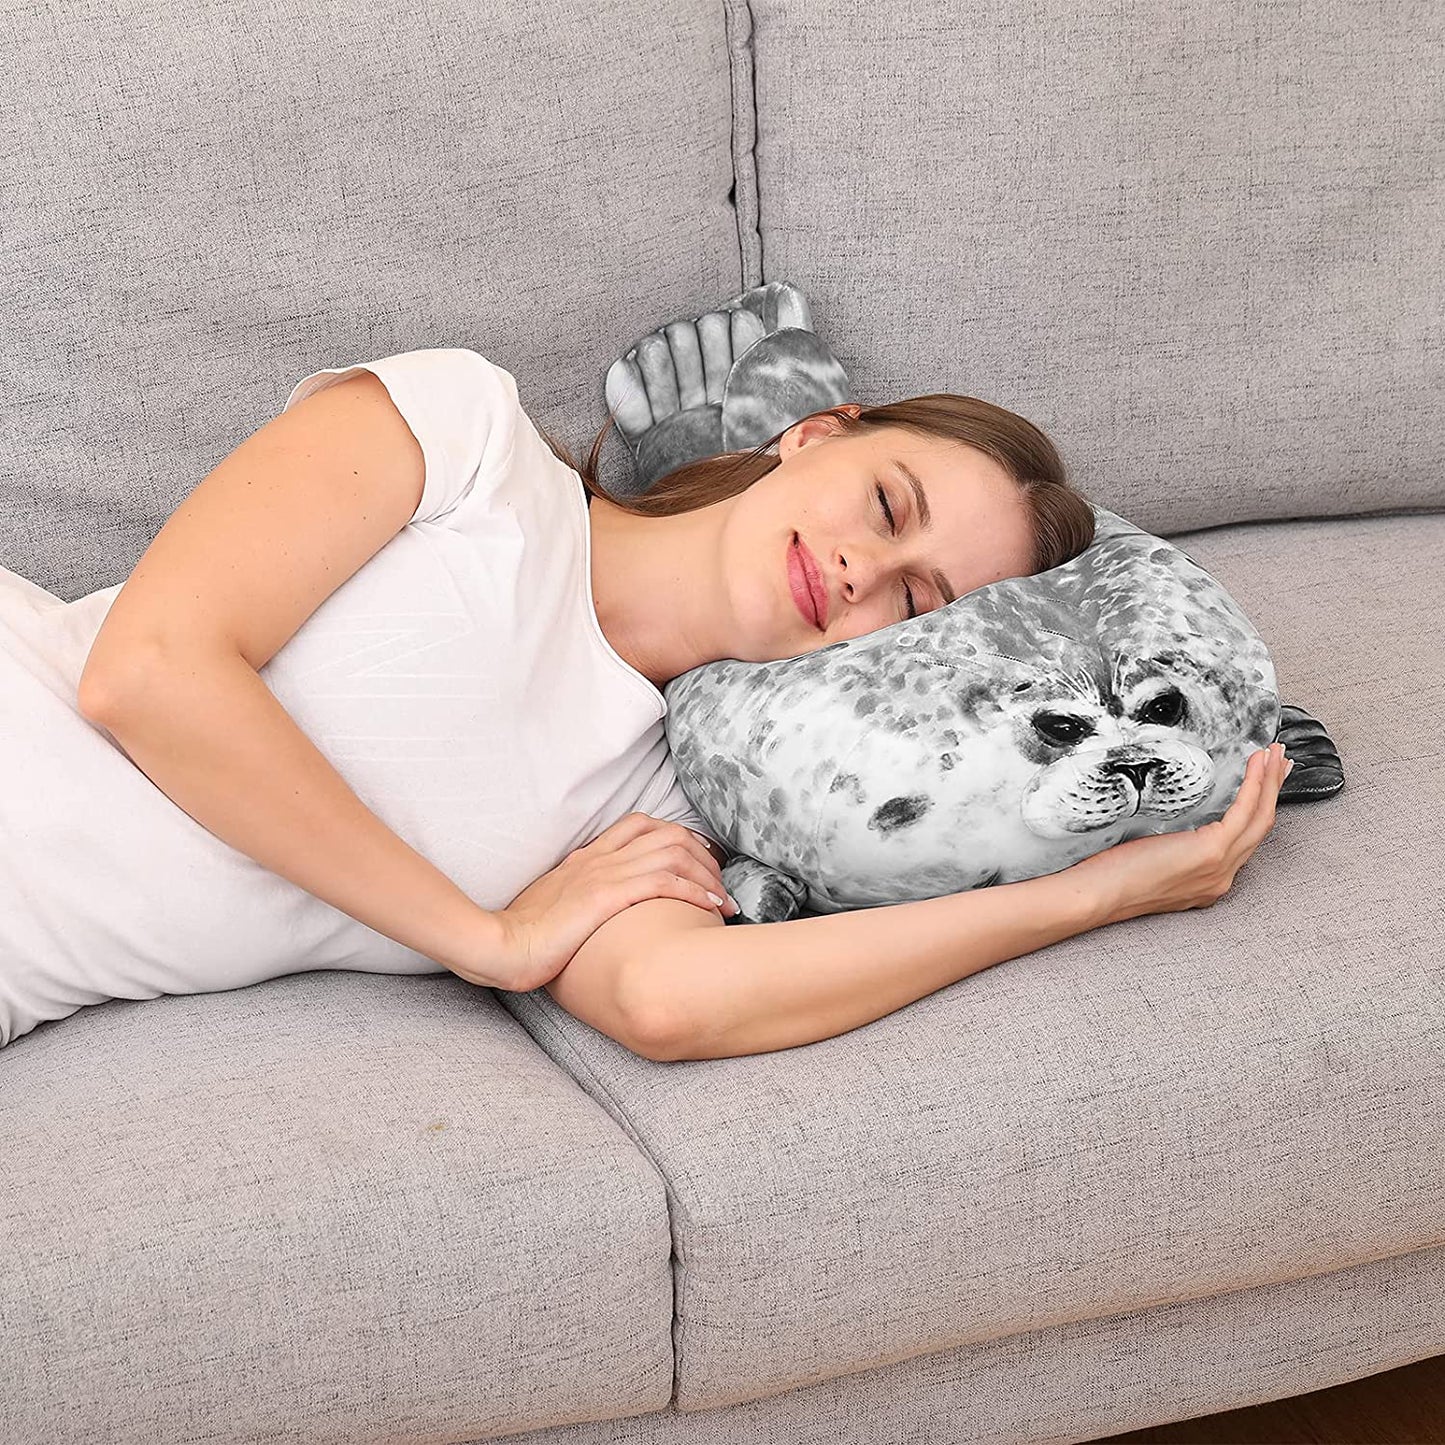 Woman asleep on a lounge with her head resting on a seal pillow